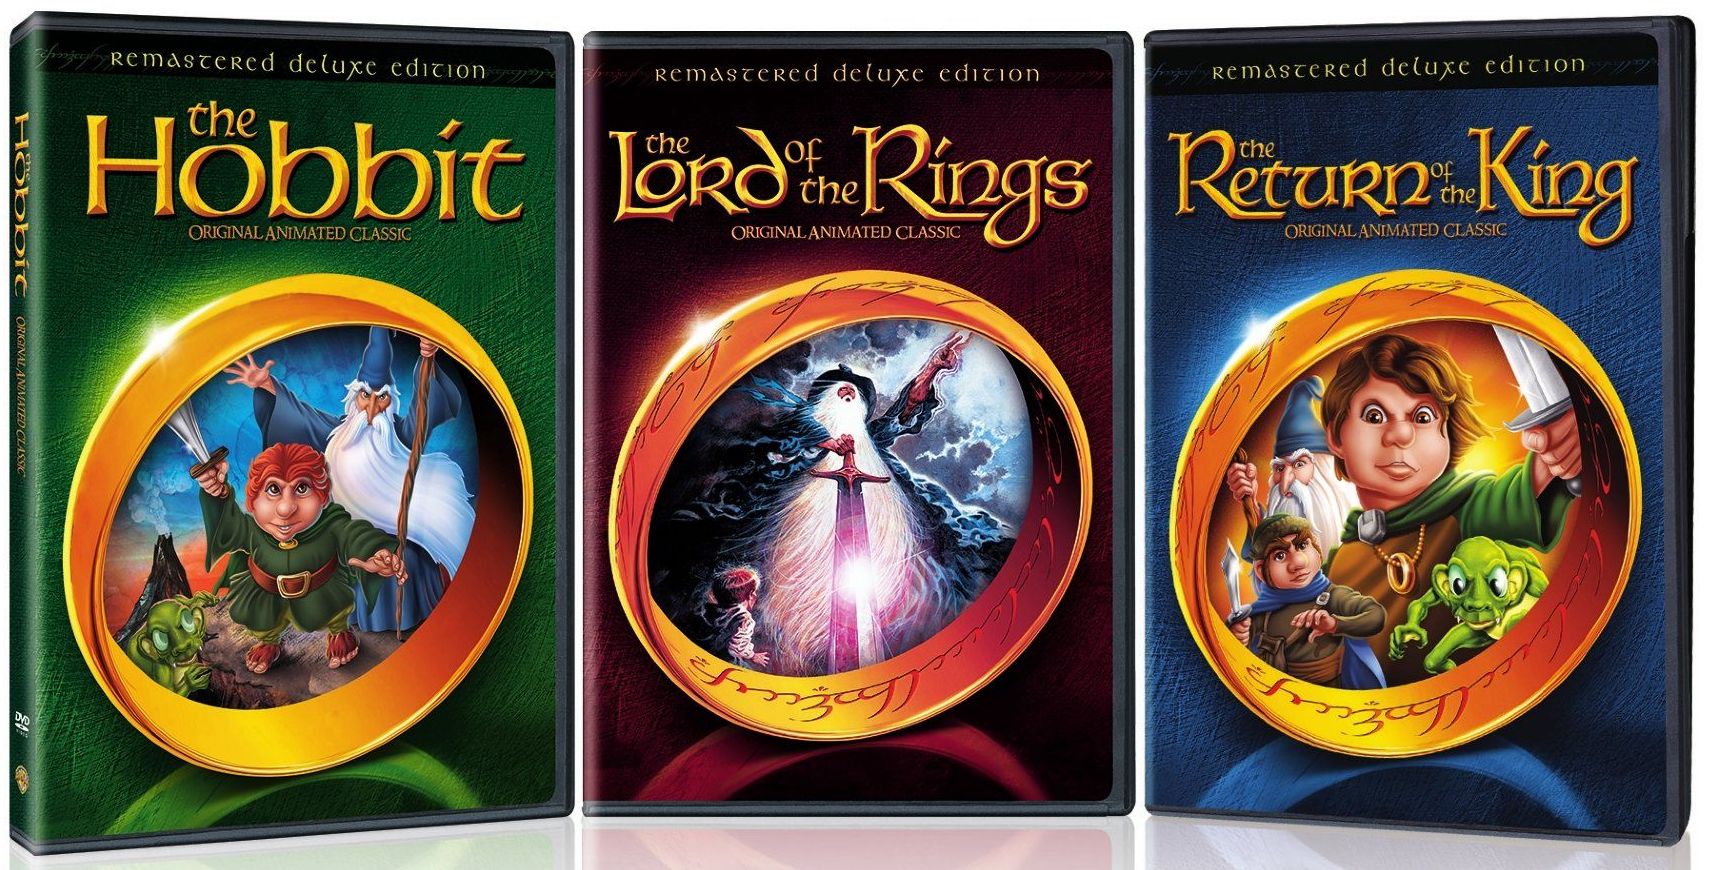 The-lord-of-the-rings-the-return-of-the-king